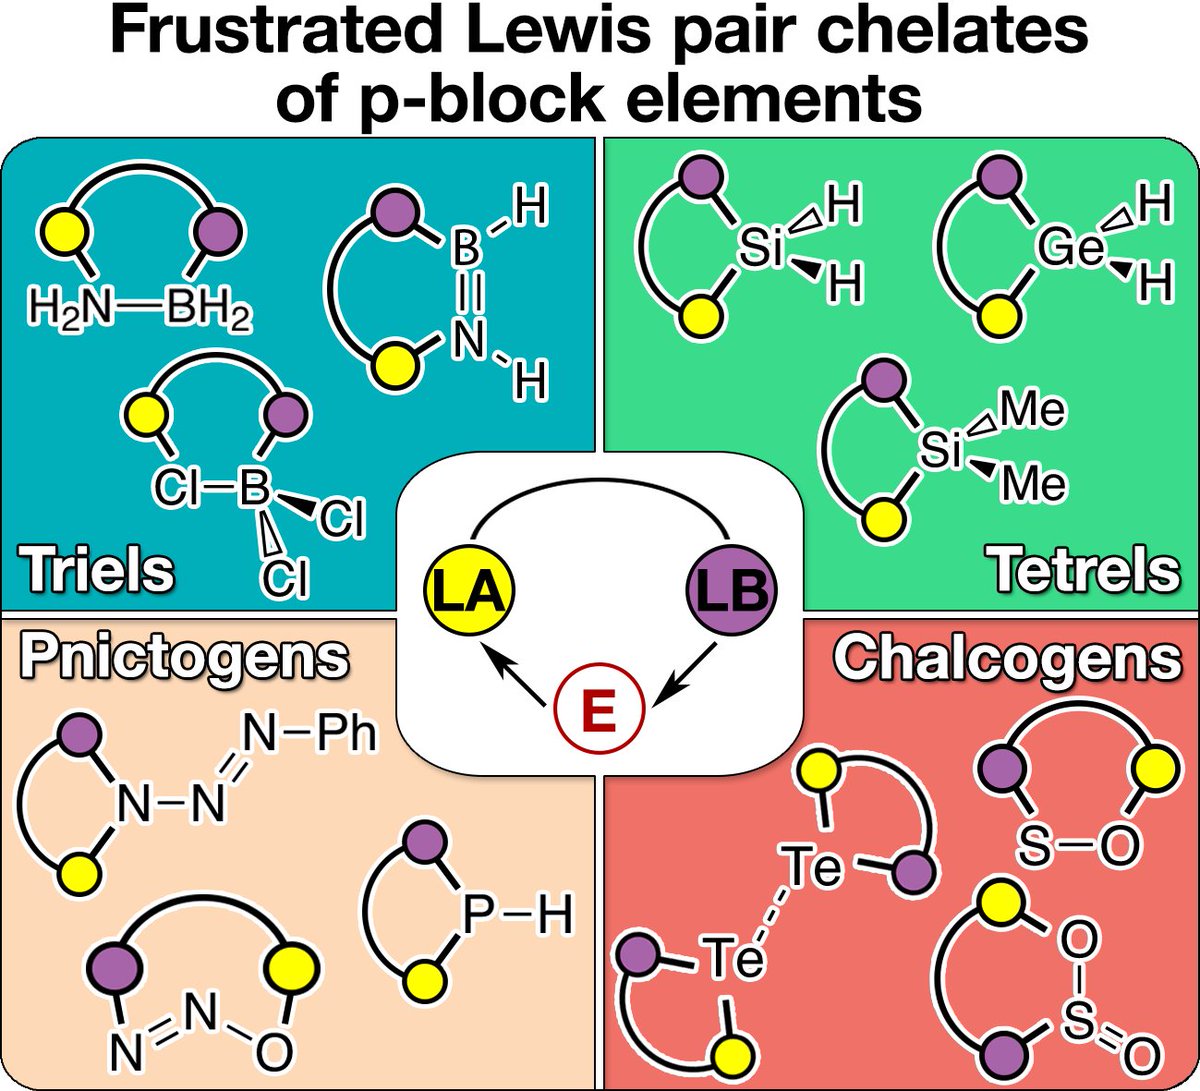 Frustrated that there isn't enough Lewis Pair content to read? Check out Brandon's (@BeFrenetic) review on FLP chelation of p-block elements, just out in @ChemEurJ …mistry-europe.onlinelibrary.wiley.com/doi/10.1002/ch…